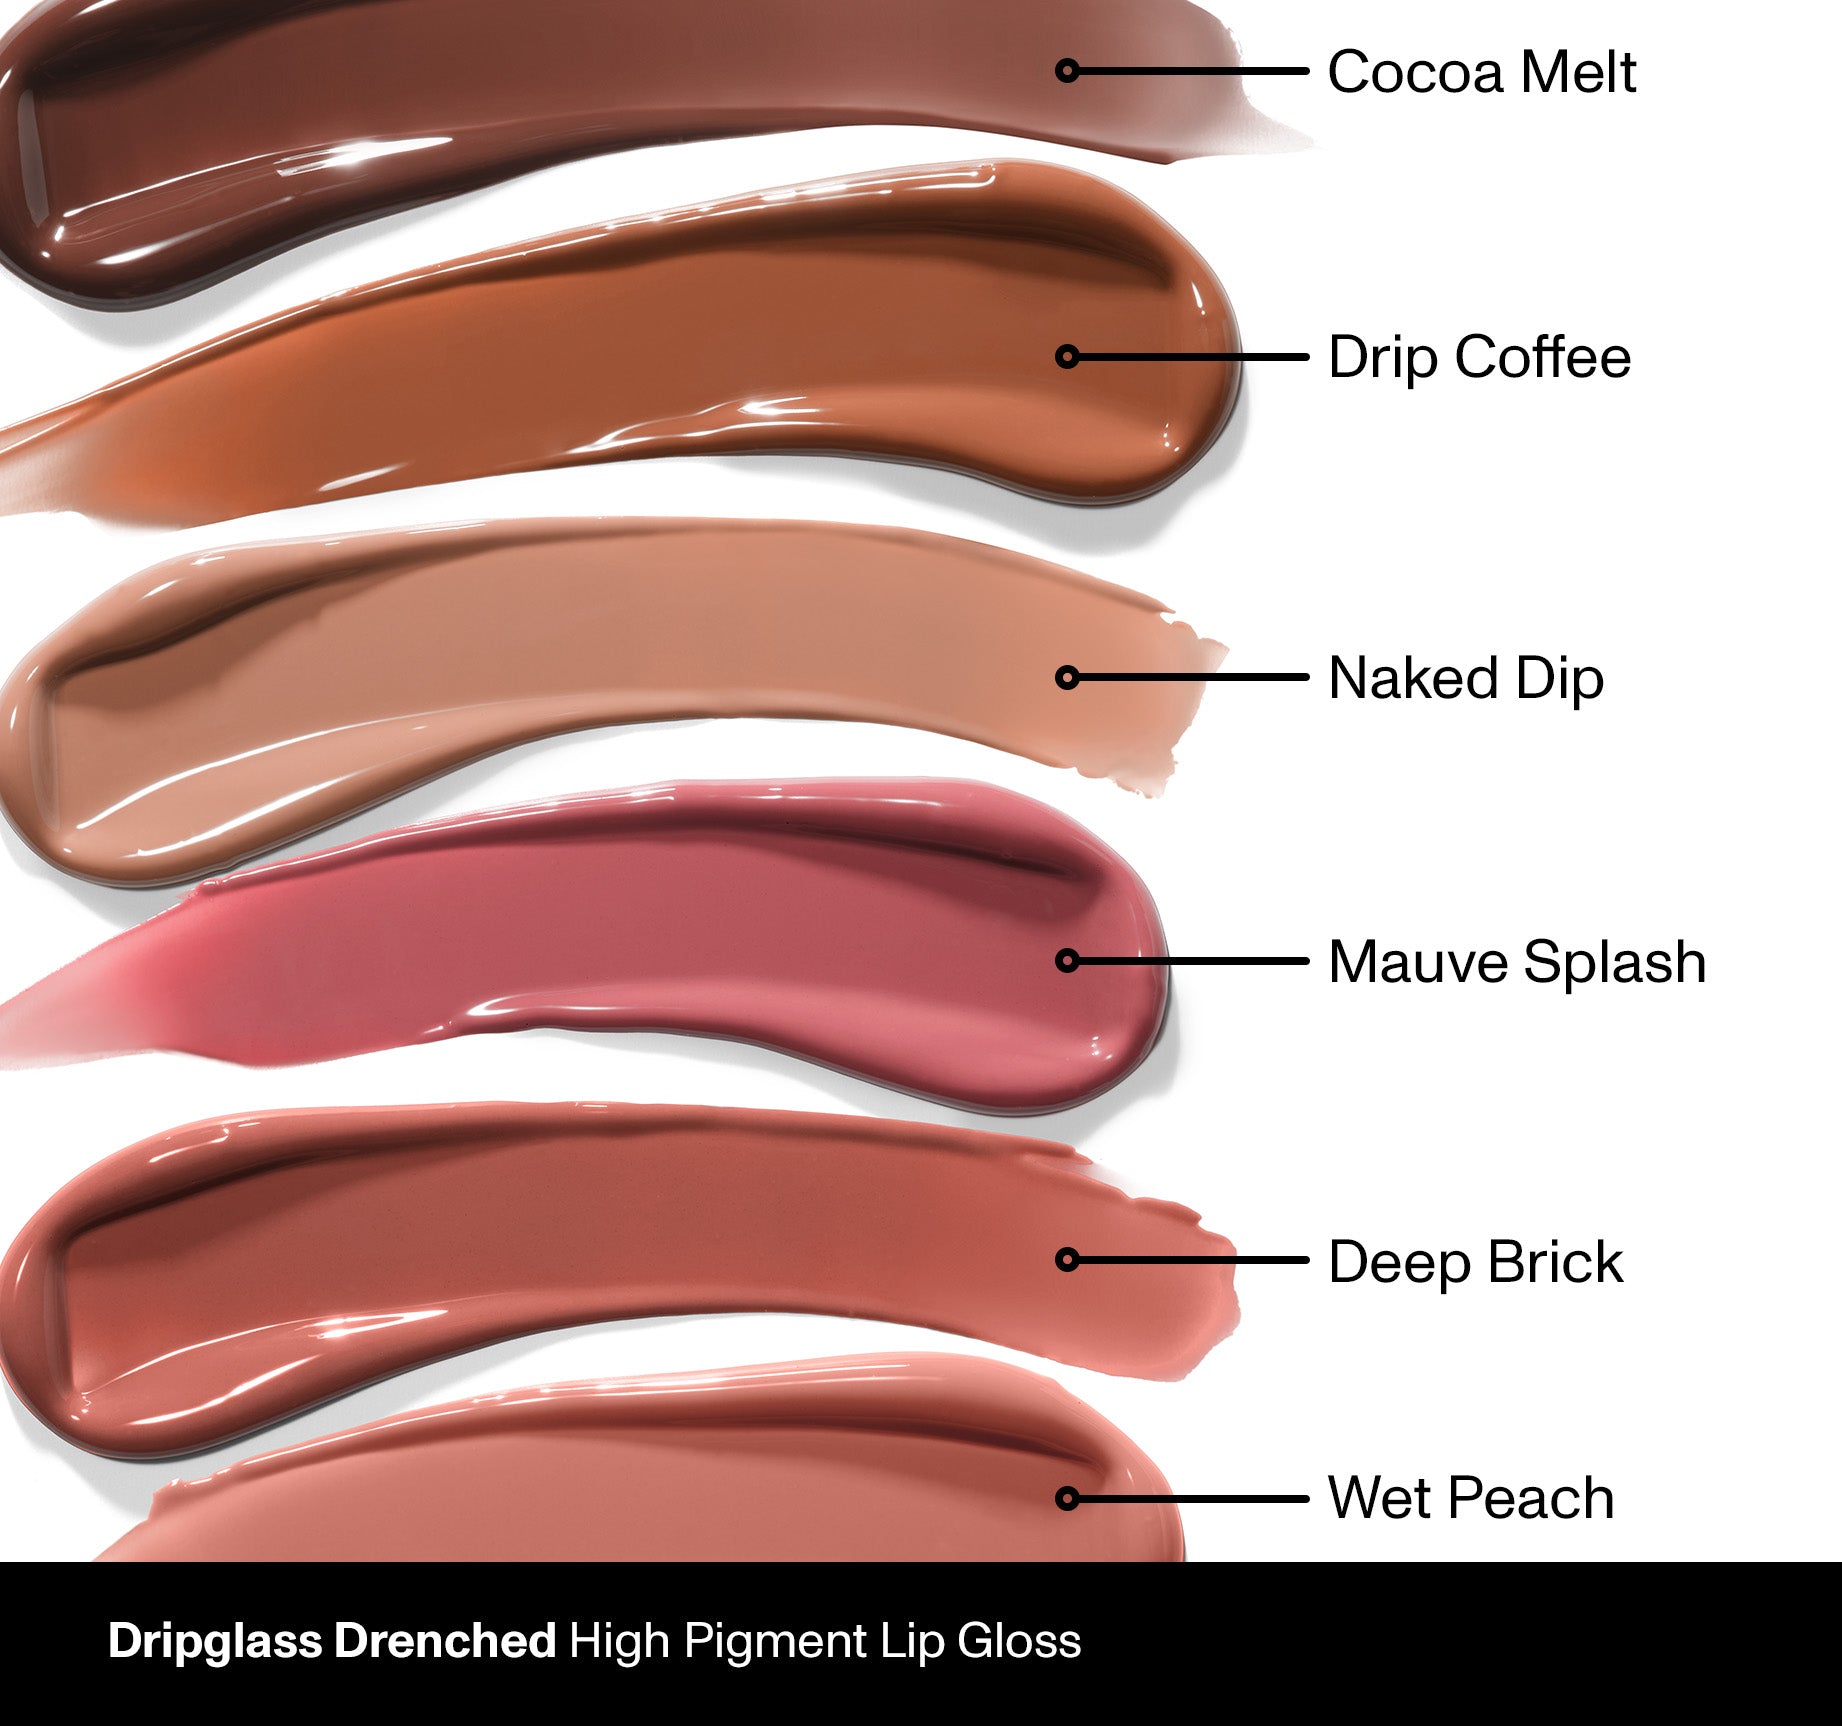 Dripglass Drenched High Pigment Lip Gloss - Wet Peach - Image 4